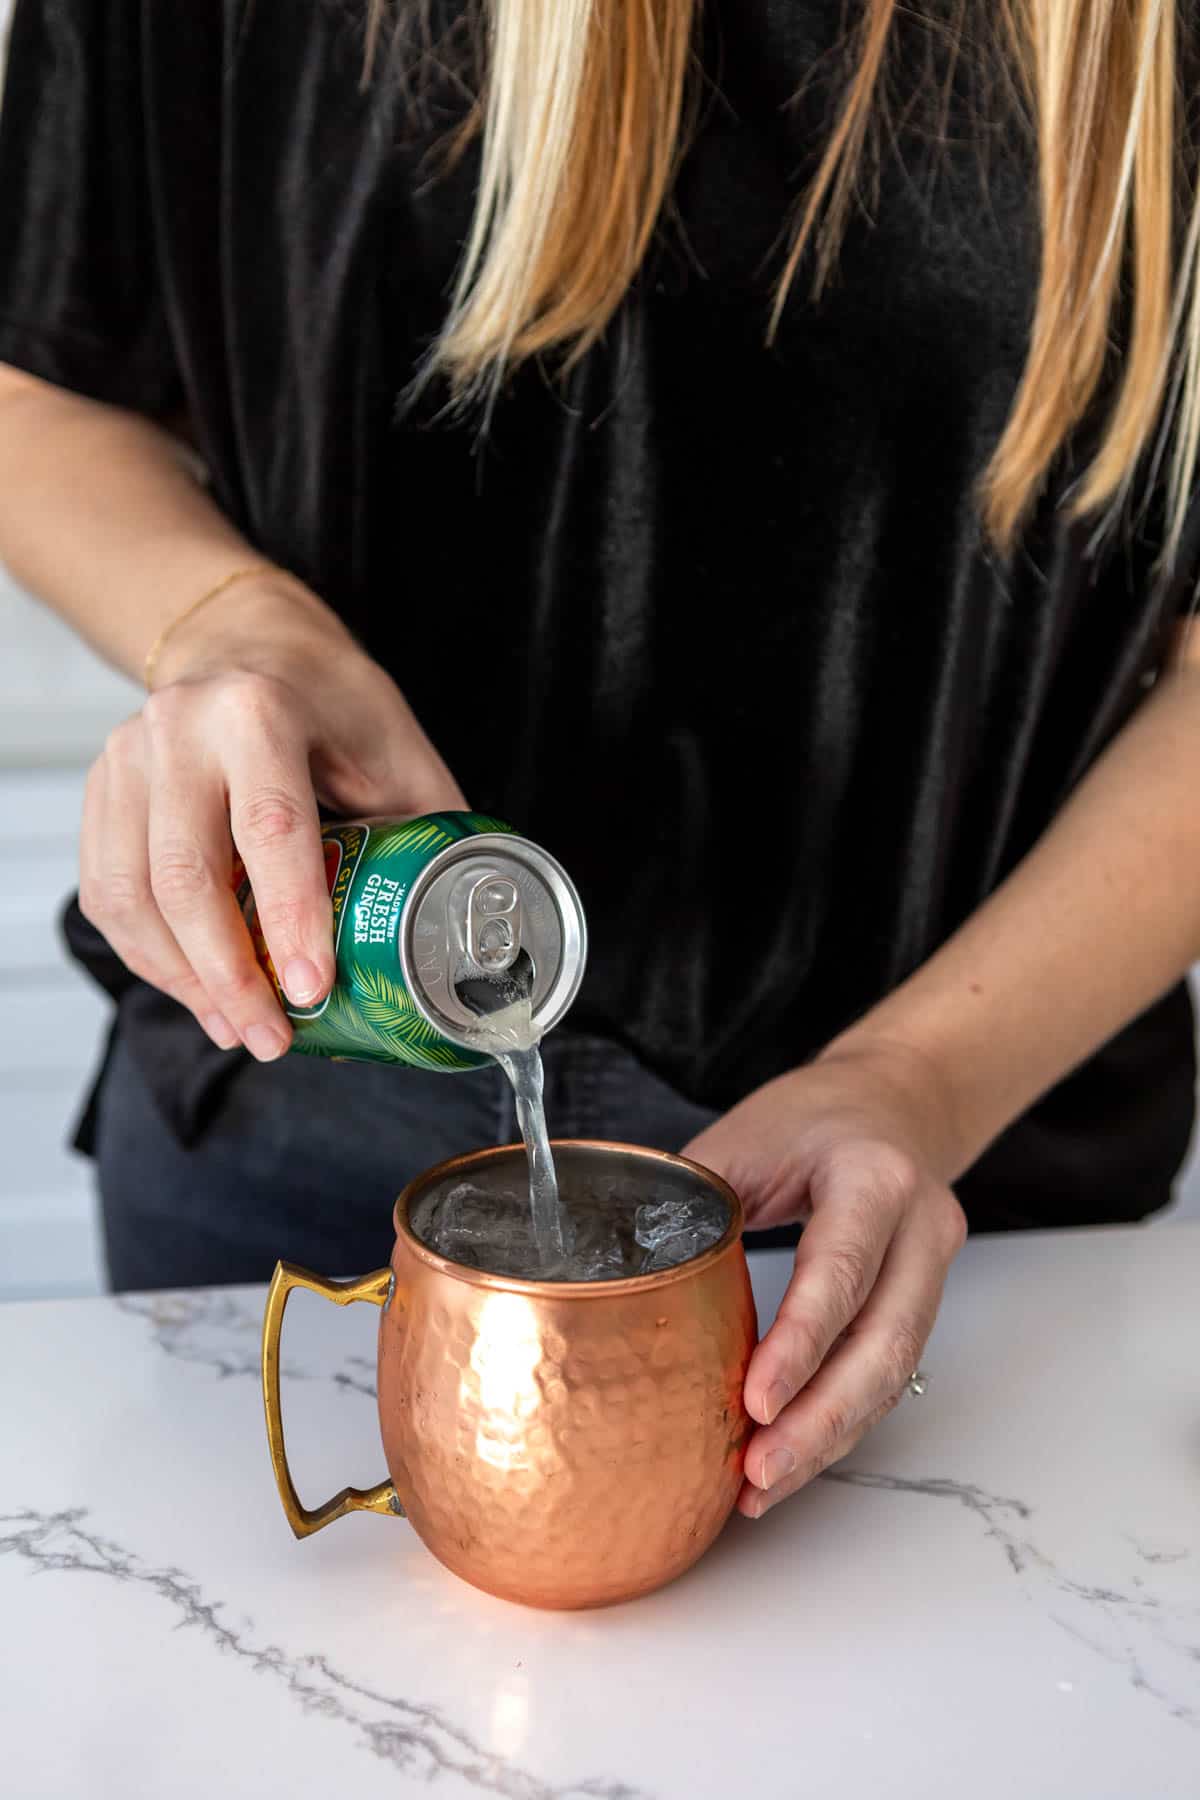 Woman pouring a can of ginger beer into a copper mule mug.